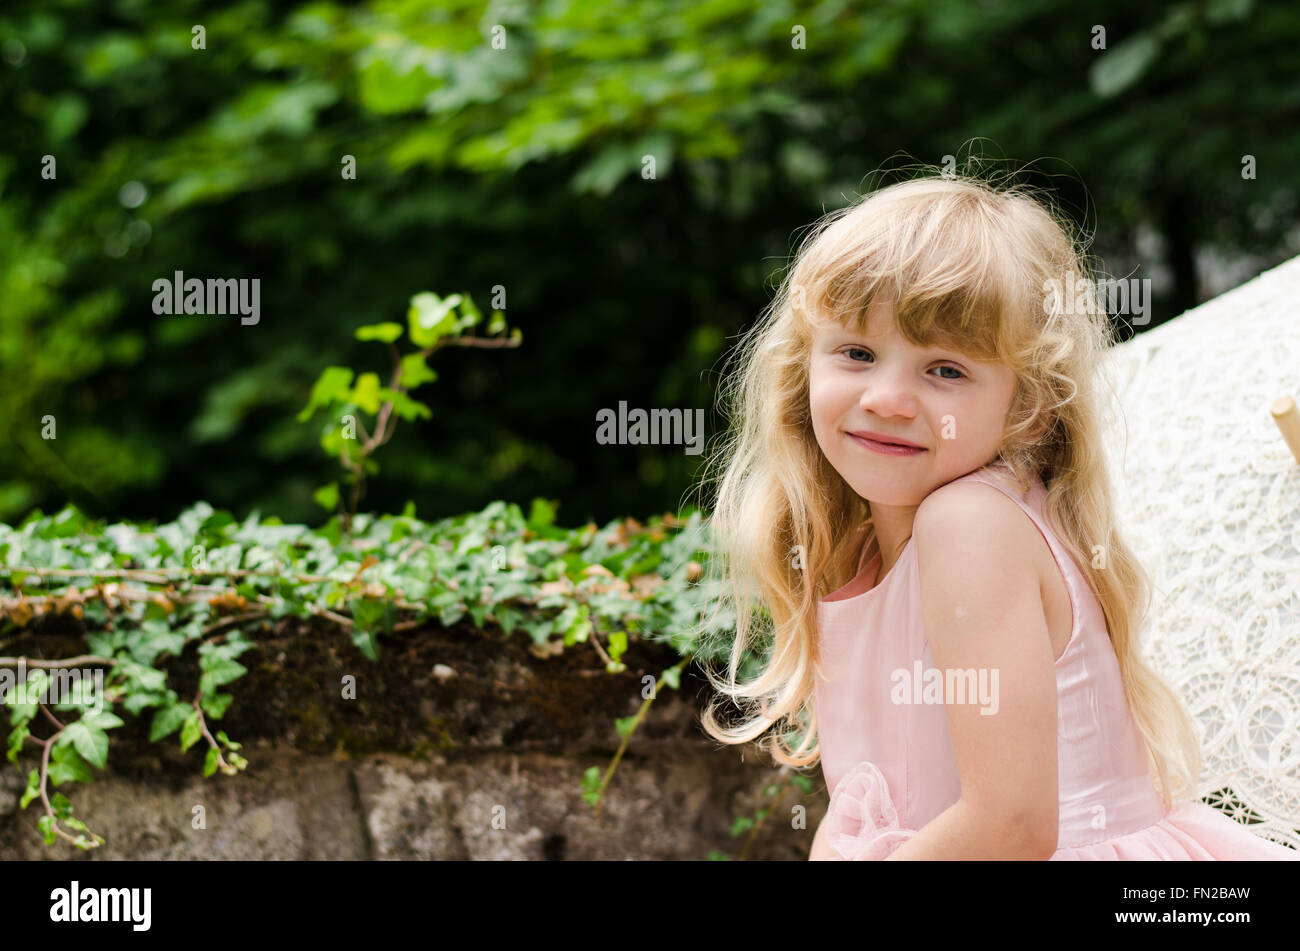 little blond child with long hair portrait Stock Photo